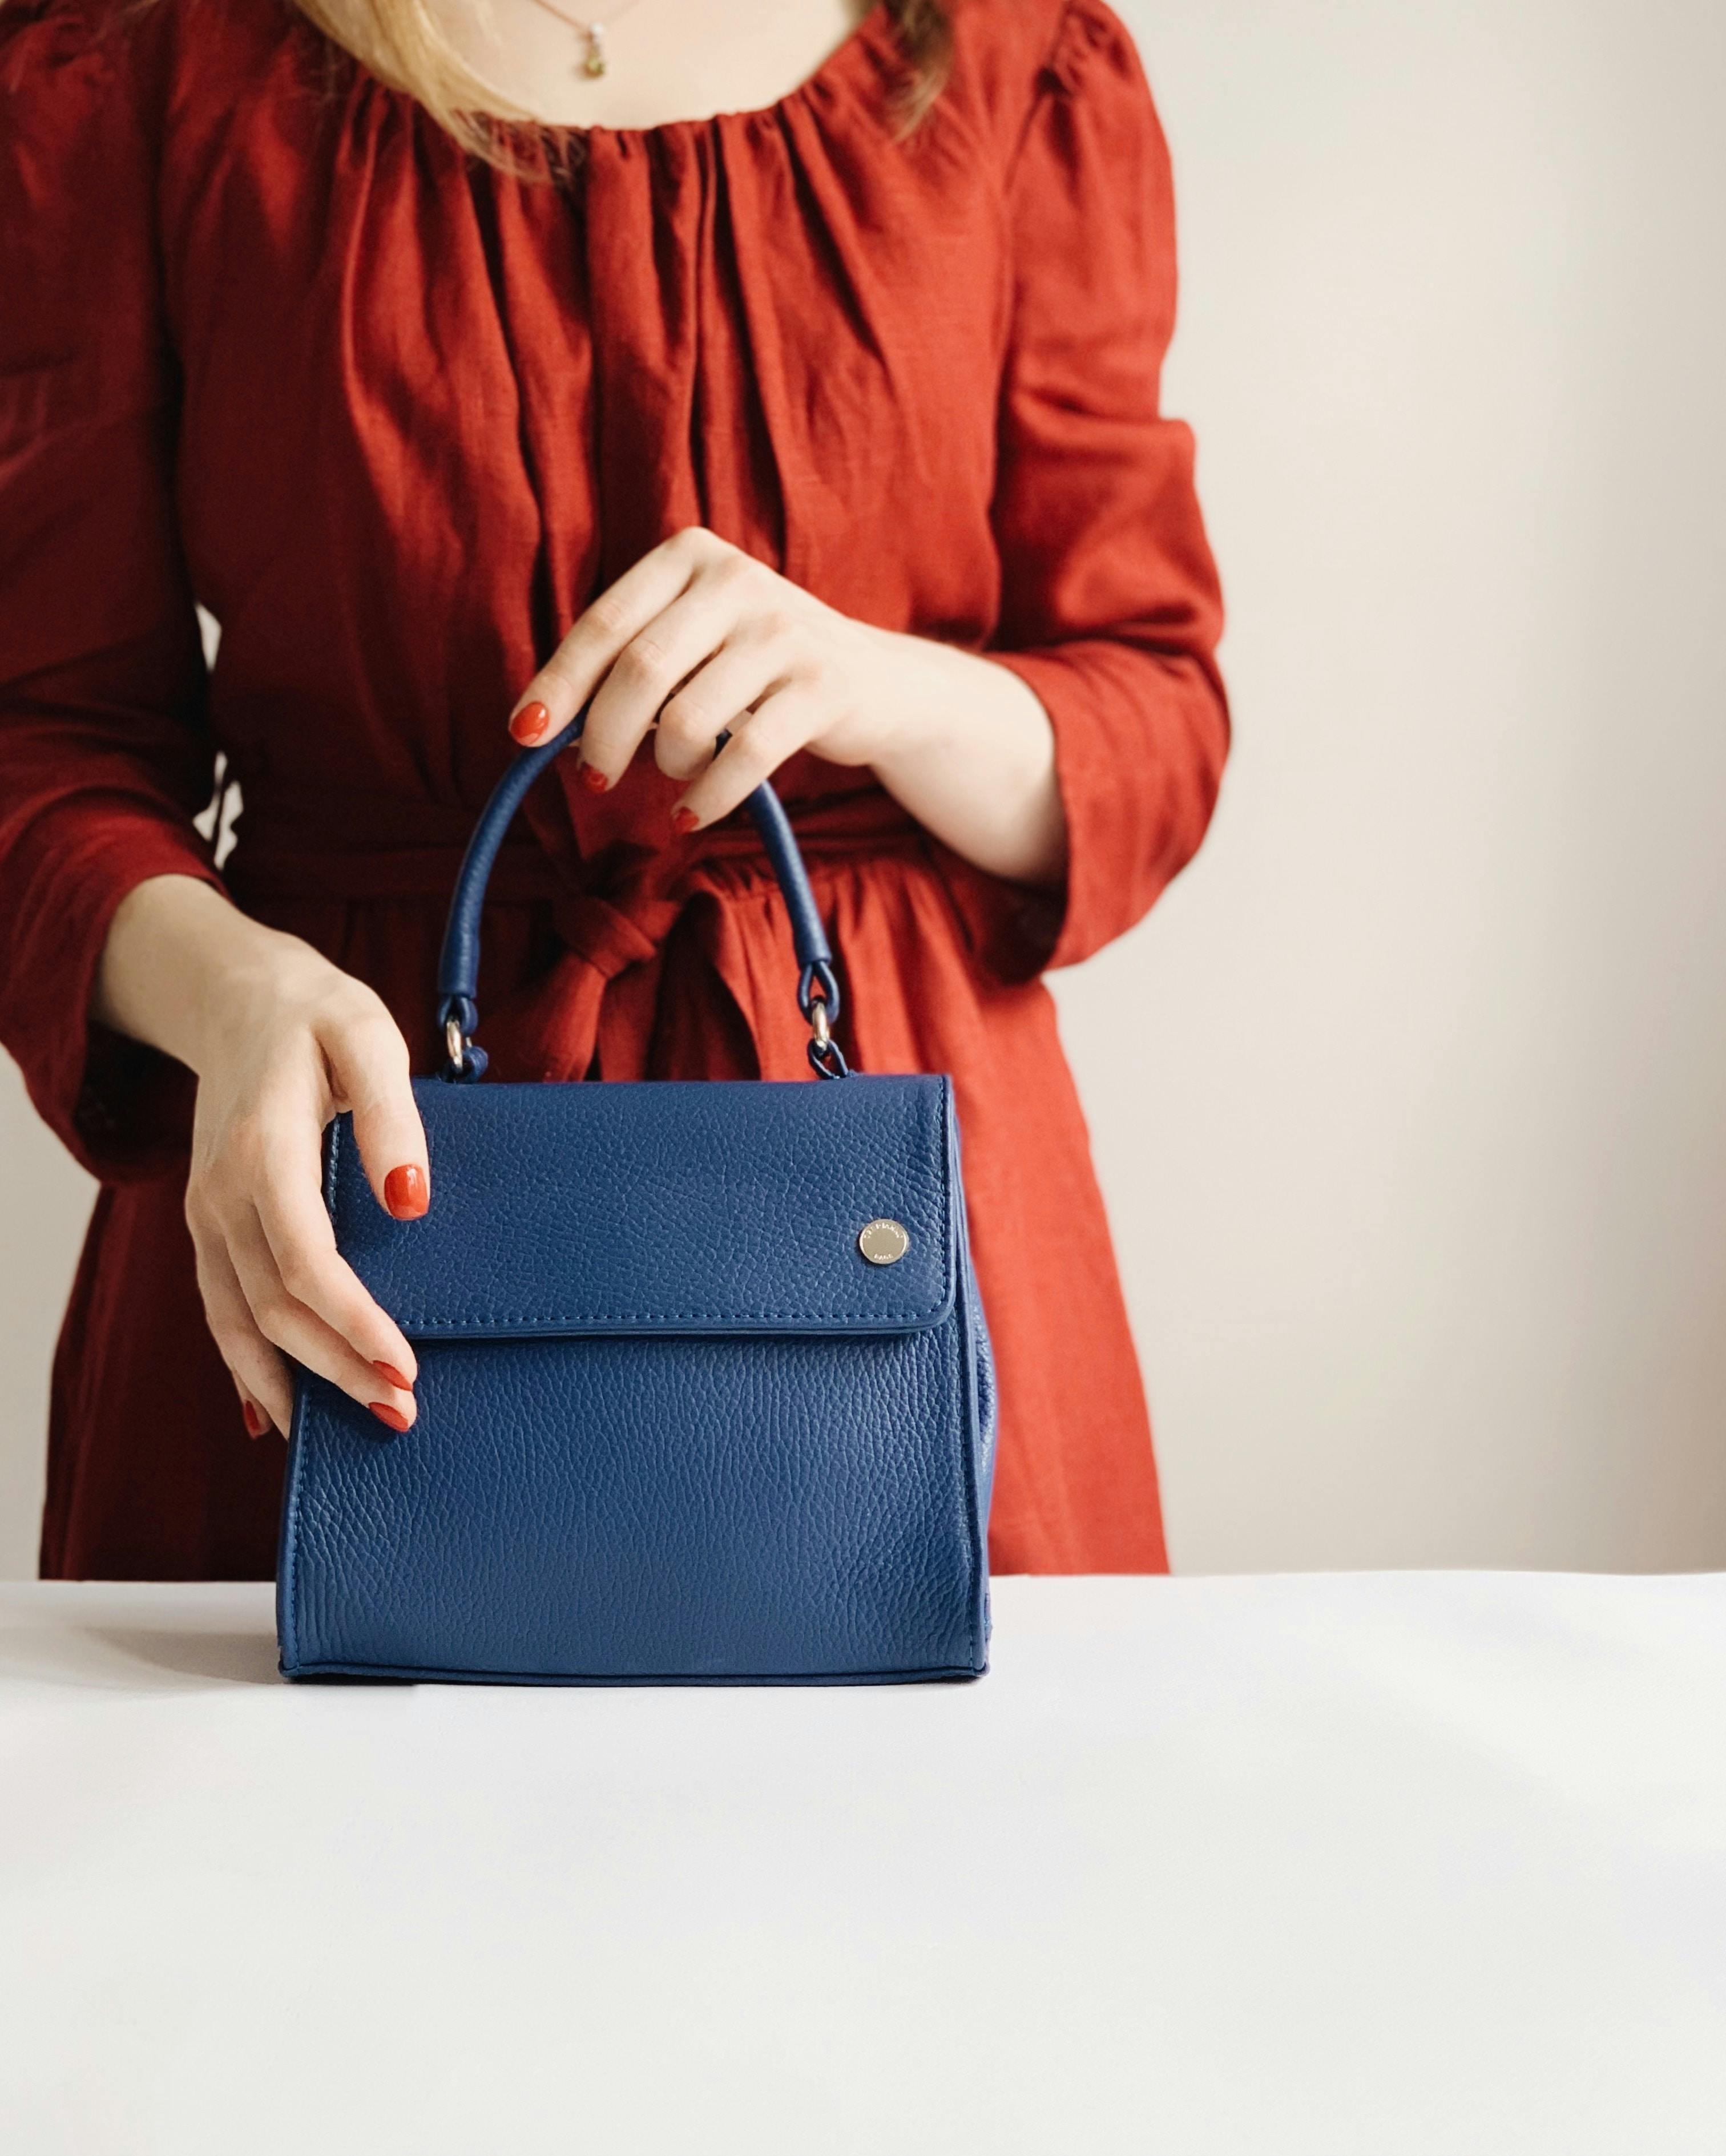 Vintage Handbags vs. Brand New: Weighing the Pros and Cons